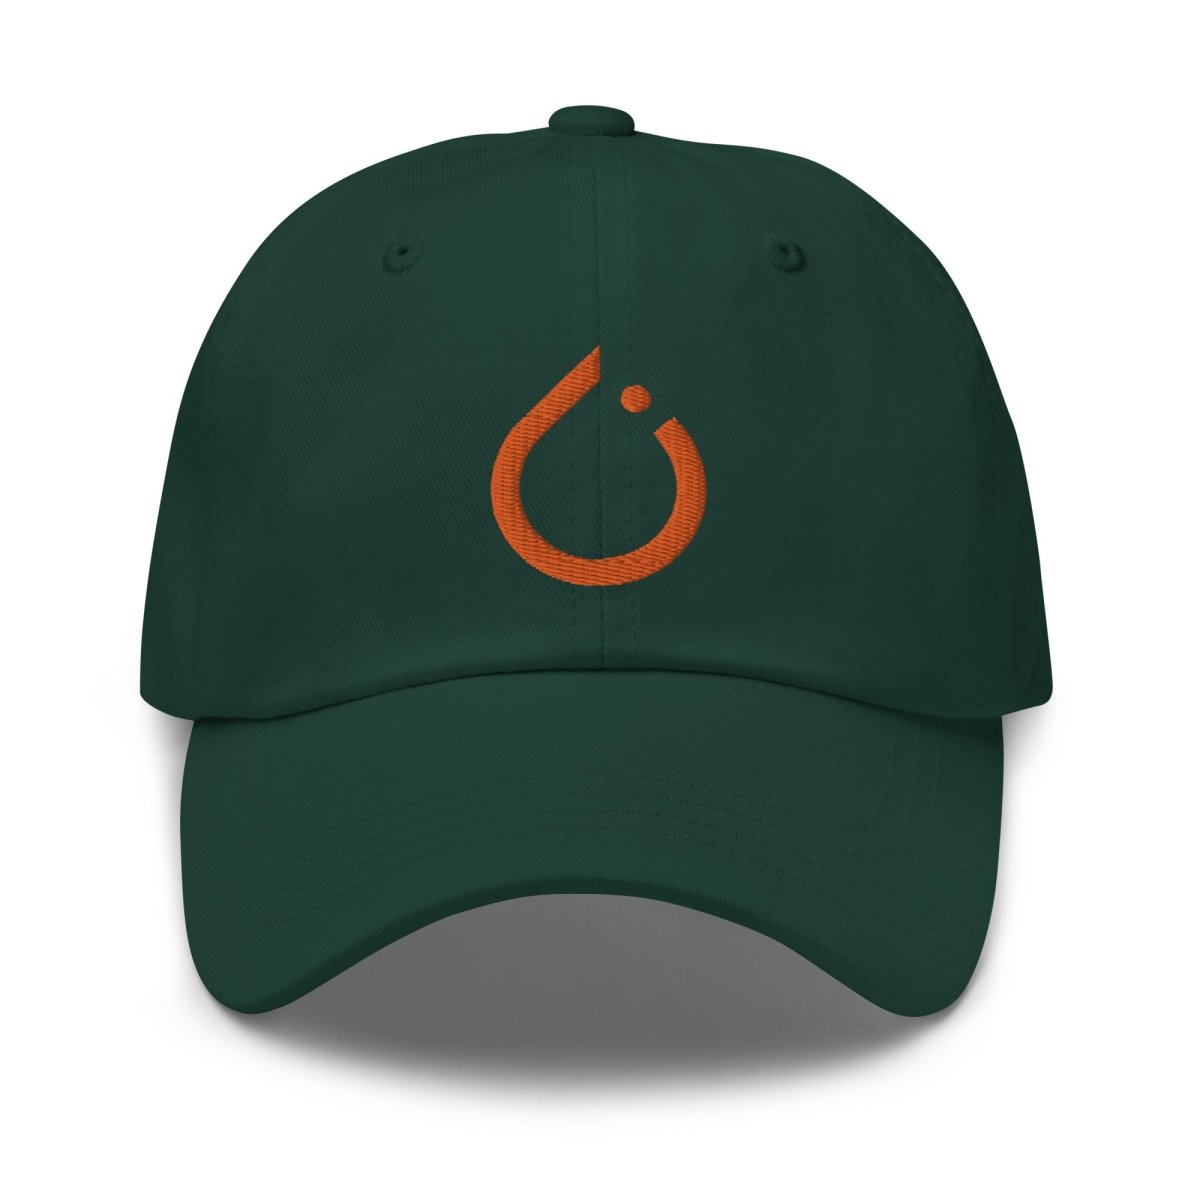 PyTorch Icon Embroidered Cap - Spruce - AI Store